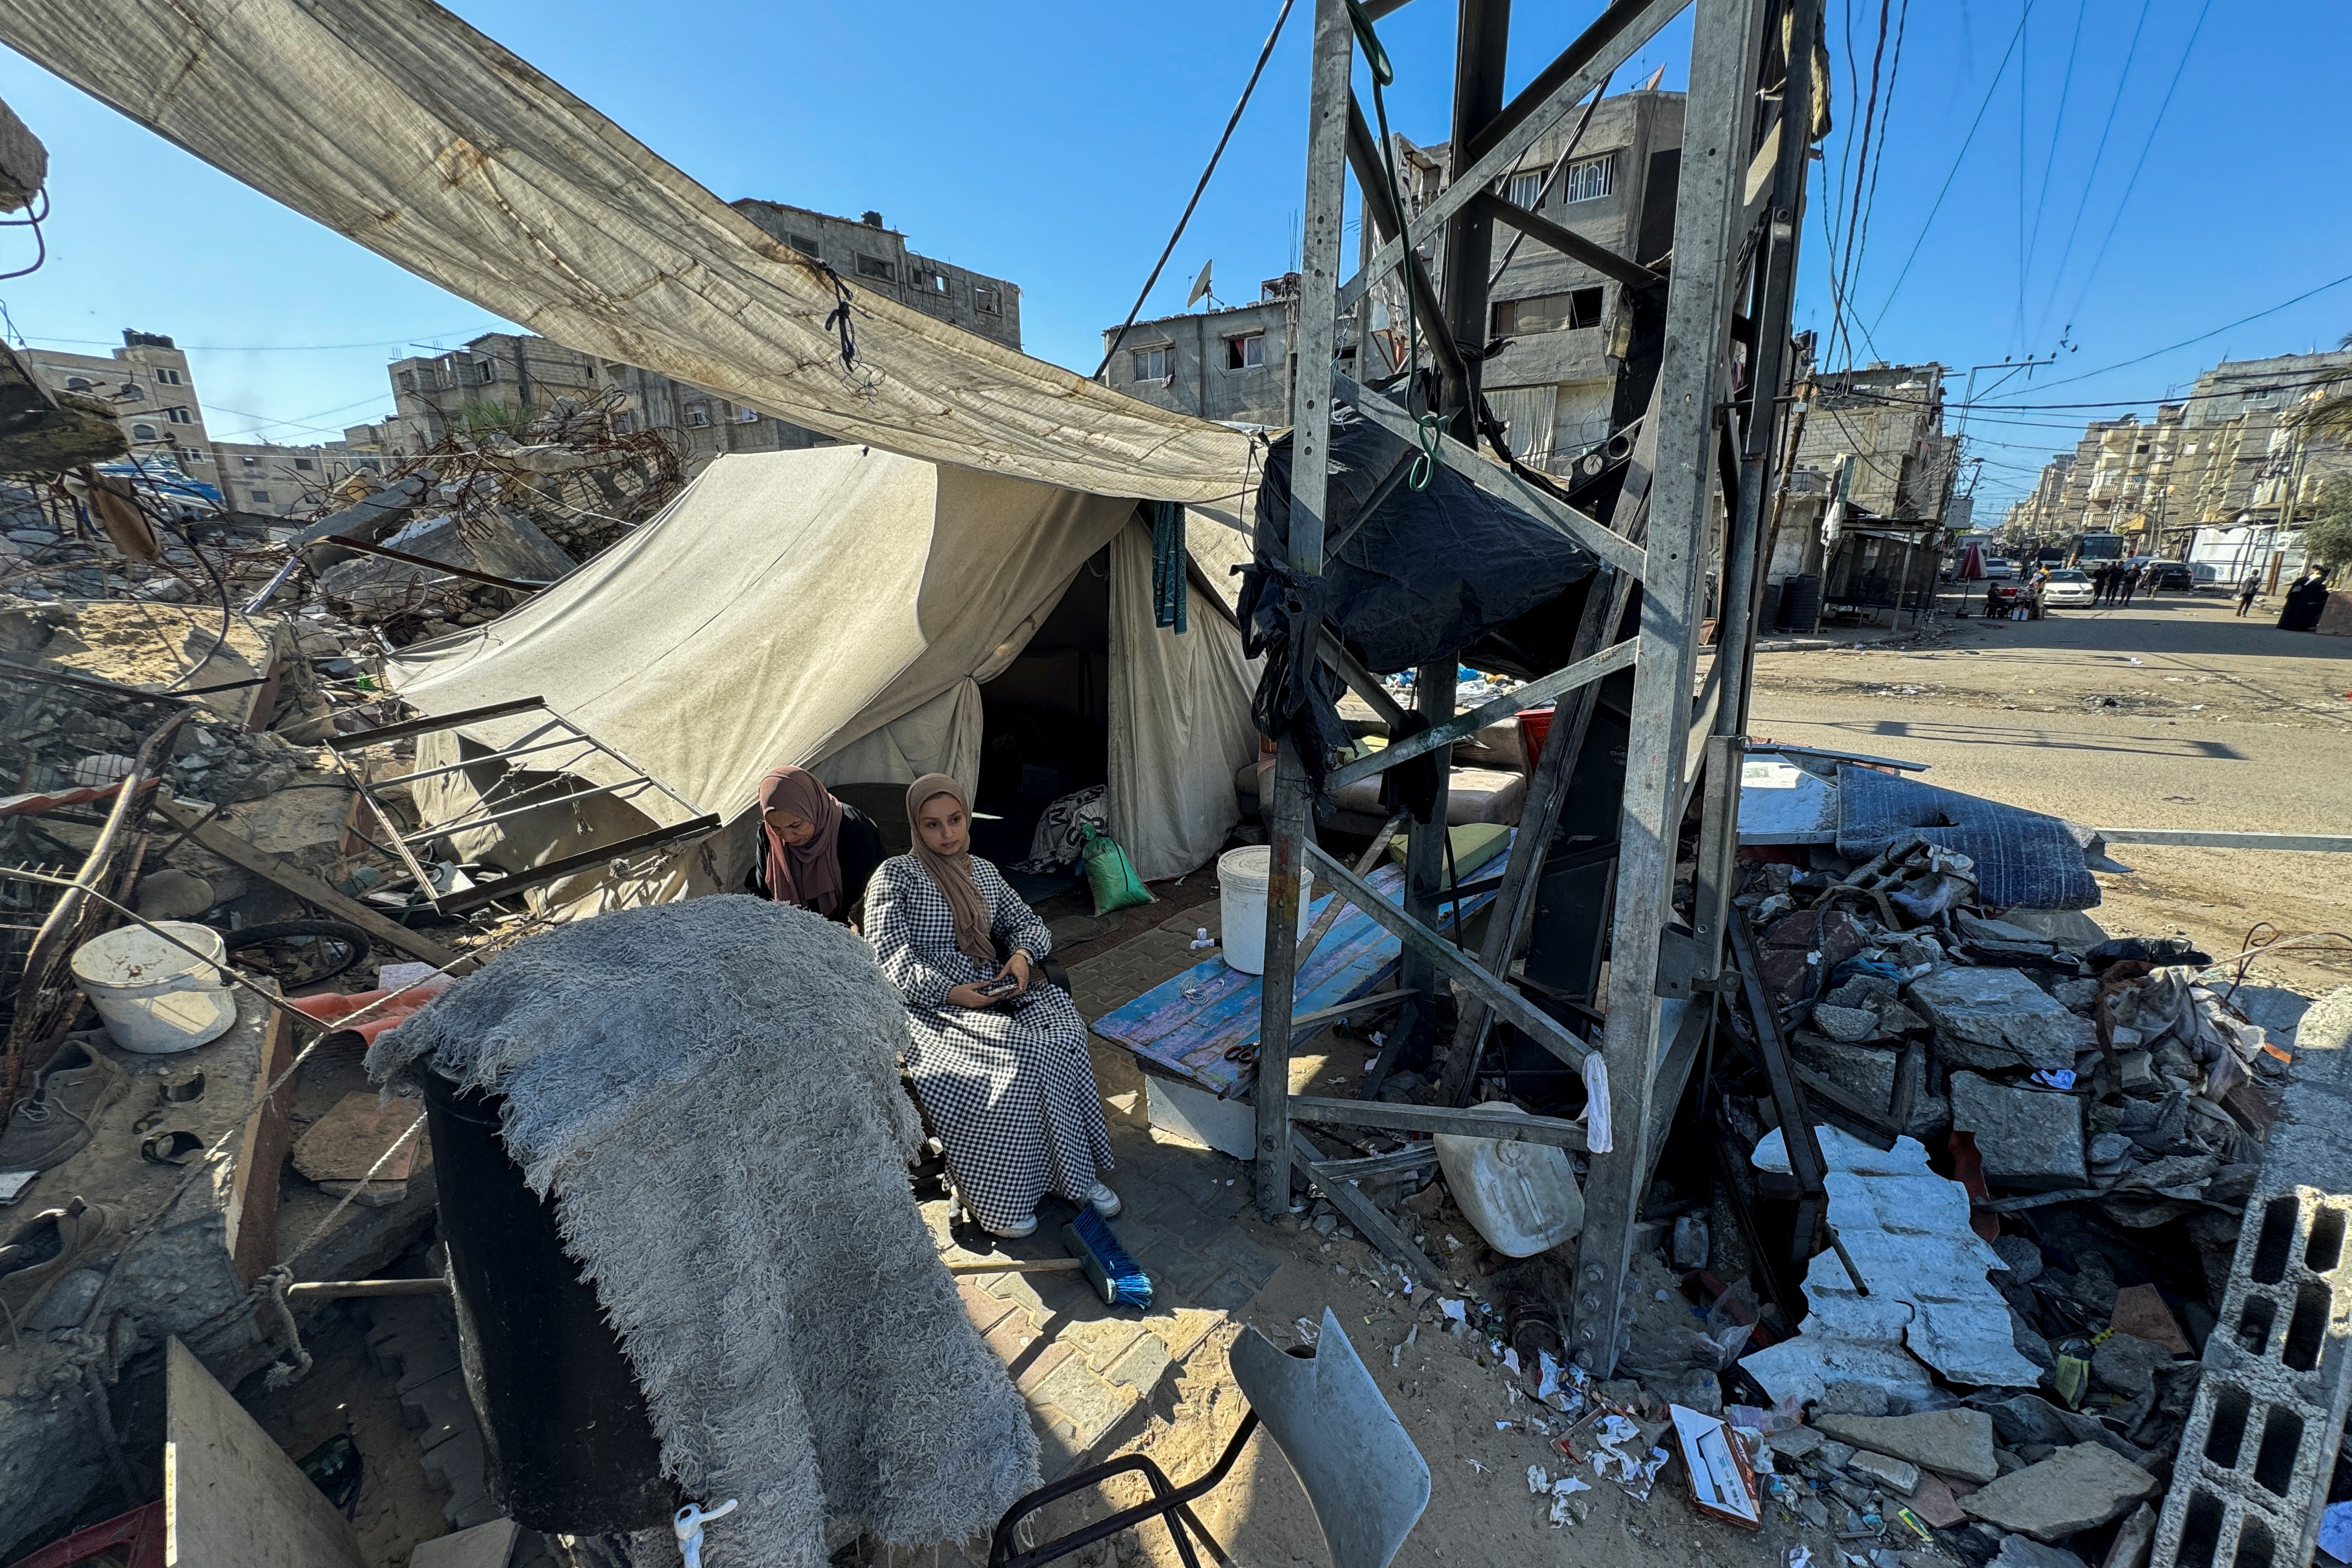 Displaced Palestinians, who fled their house due to Israel's military offensive, sit outside their tent, in Rafah, in the southern Gaza Strip